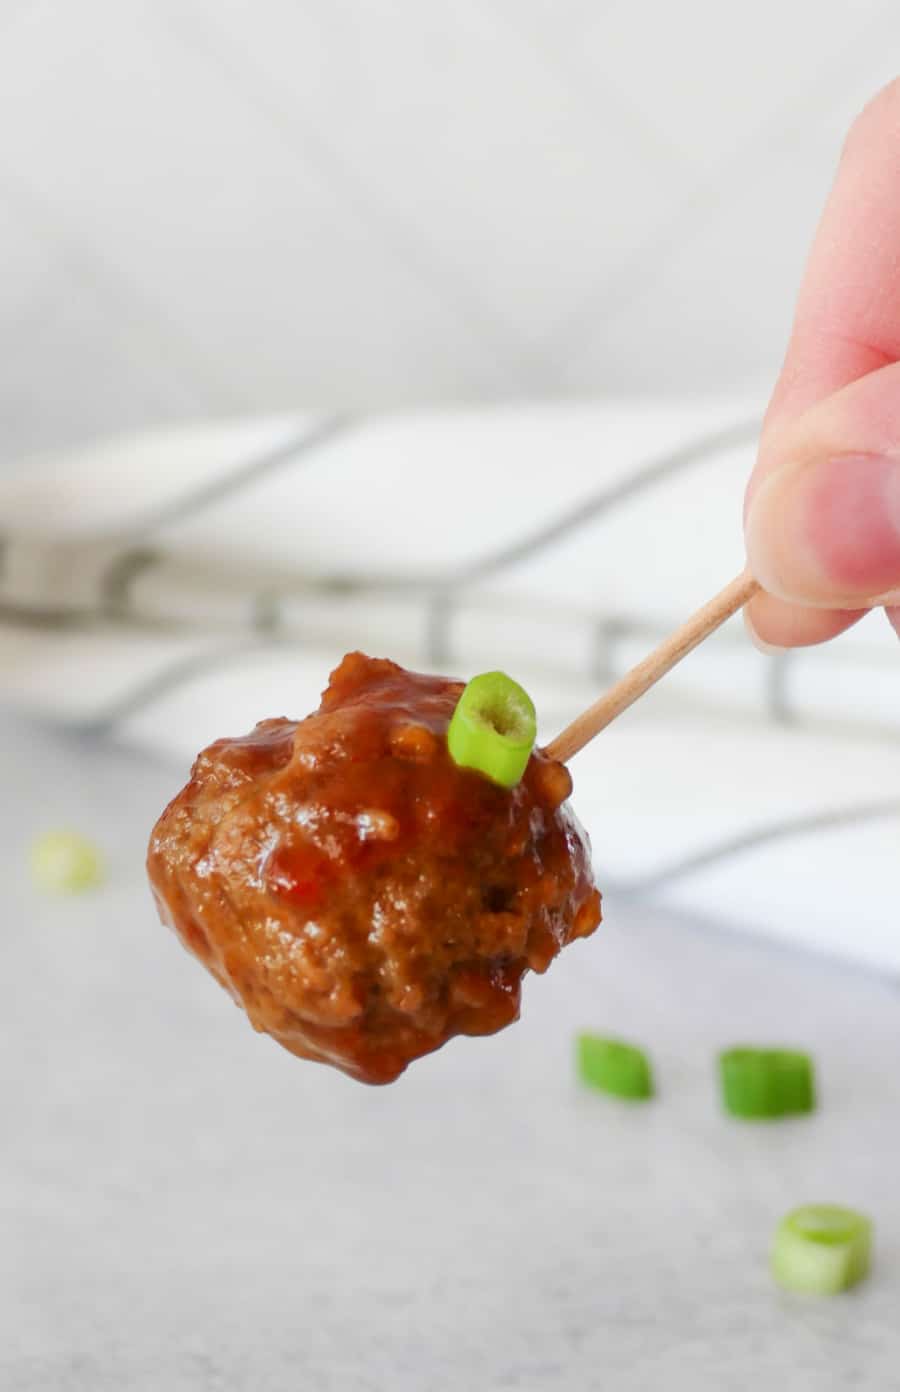 hand holding a meatball on a toothpick with sauce and green onion garnish